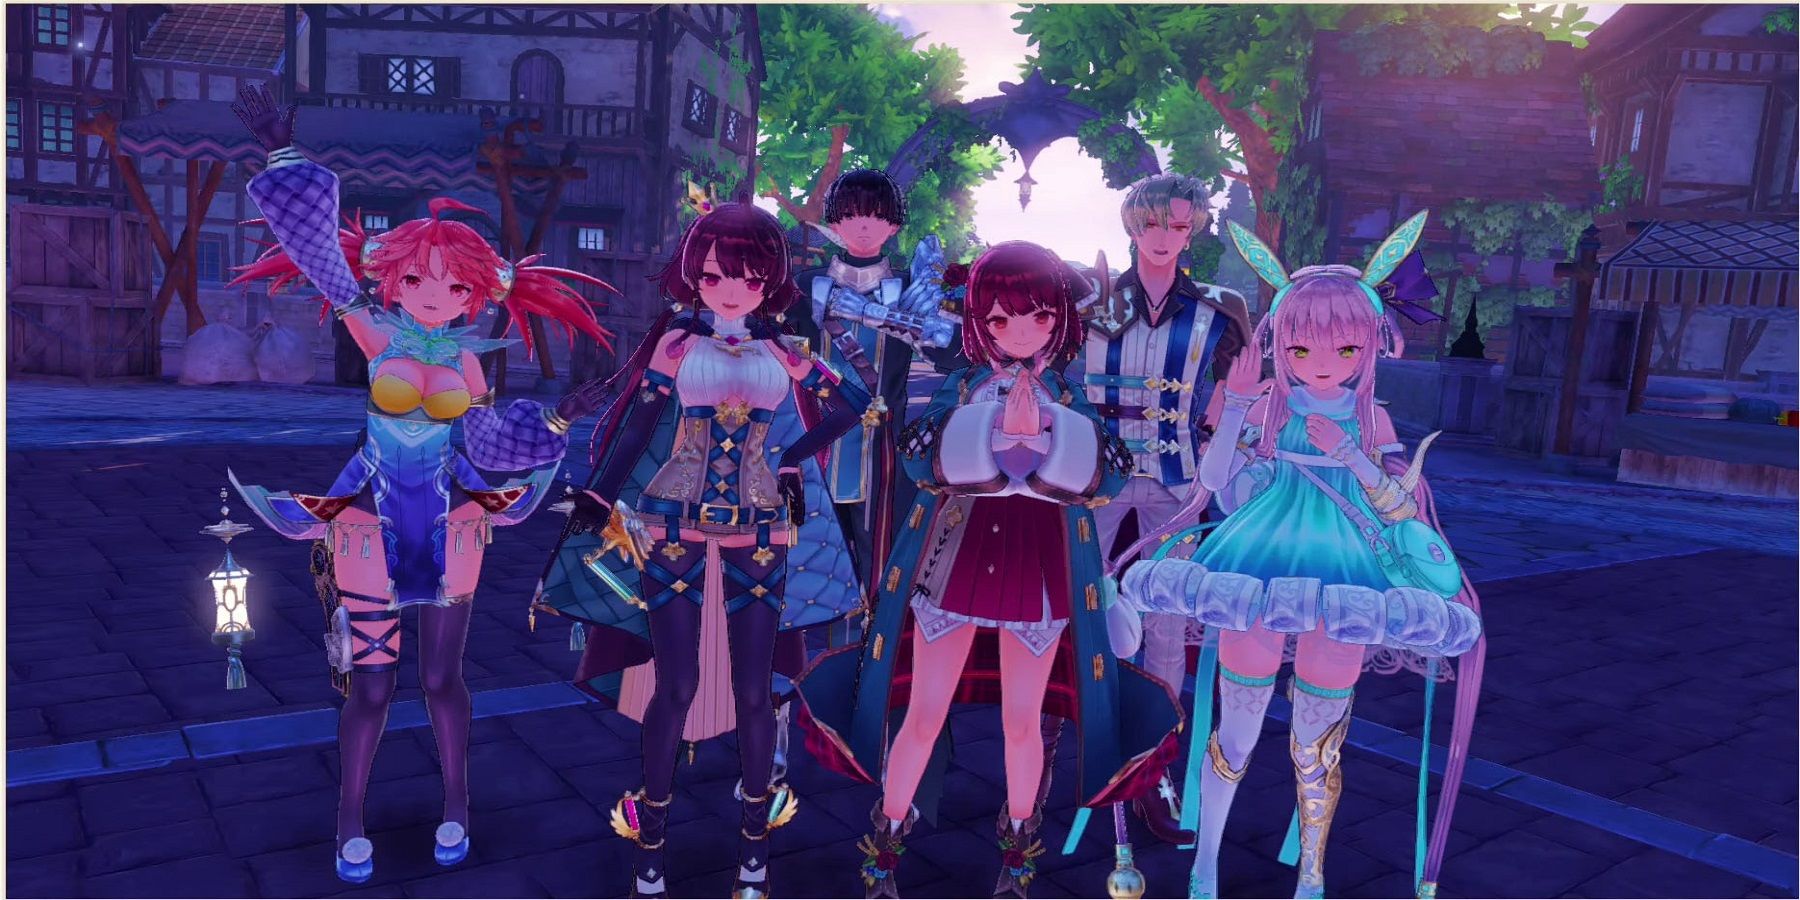 The protagonists of Atelier Sophie 2 - The Alchemist of The Mysterious Dream